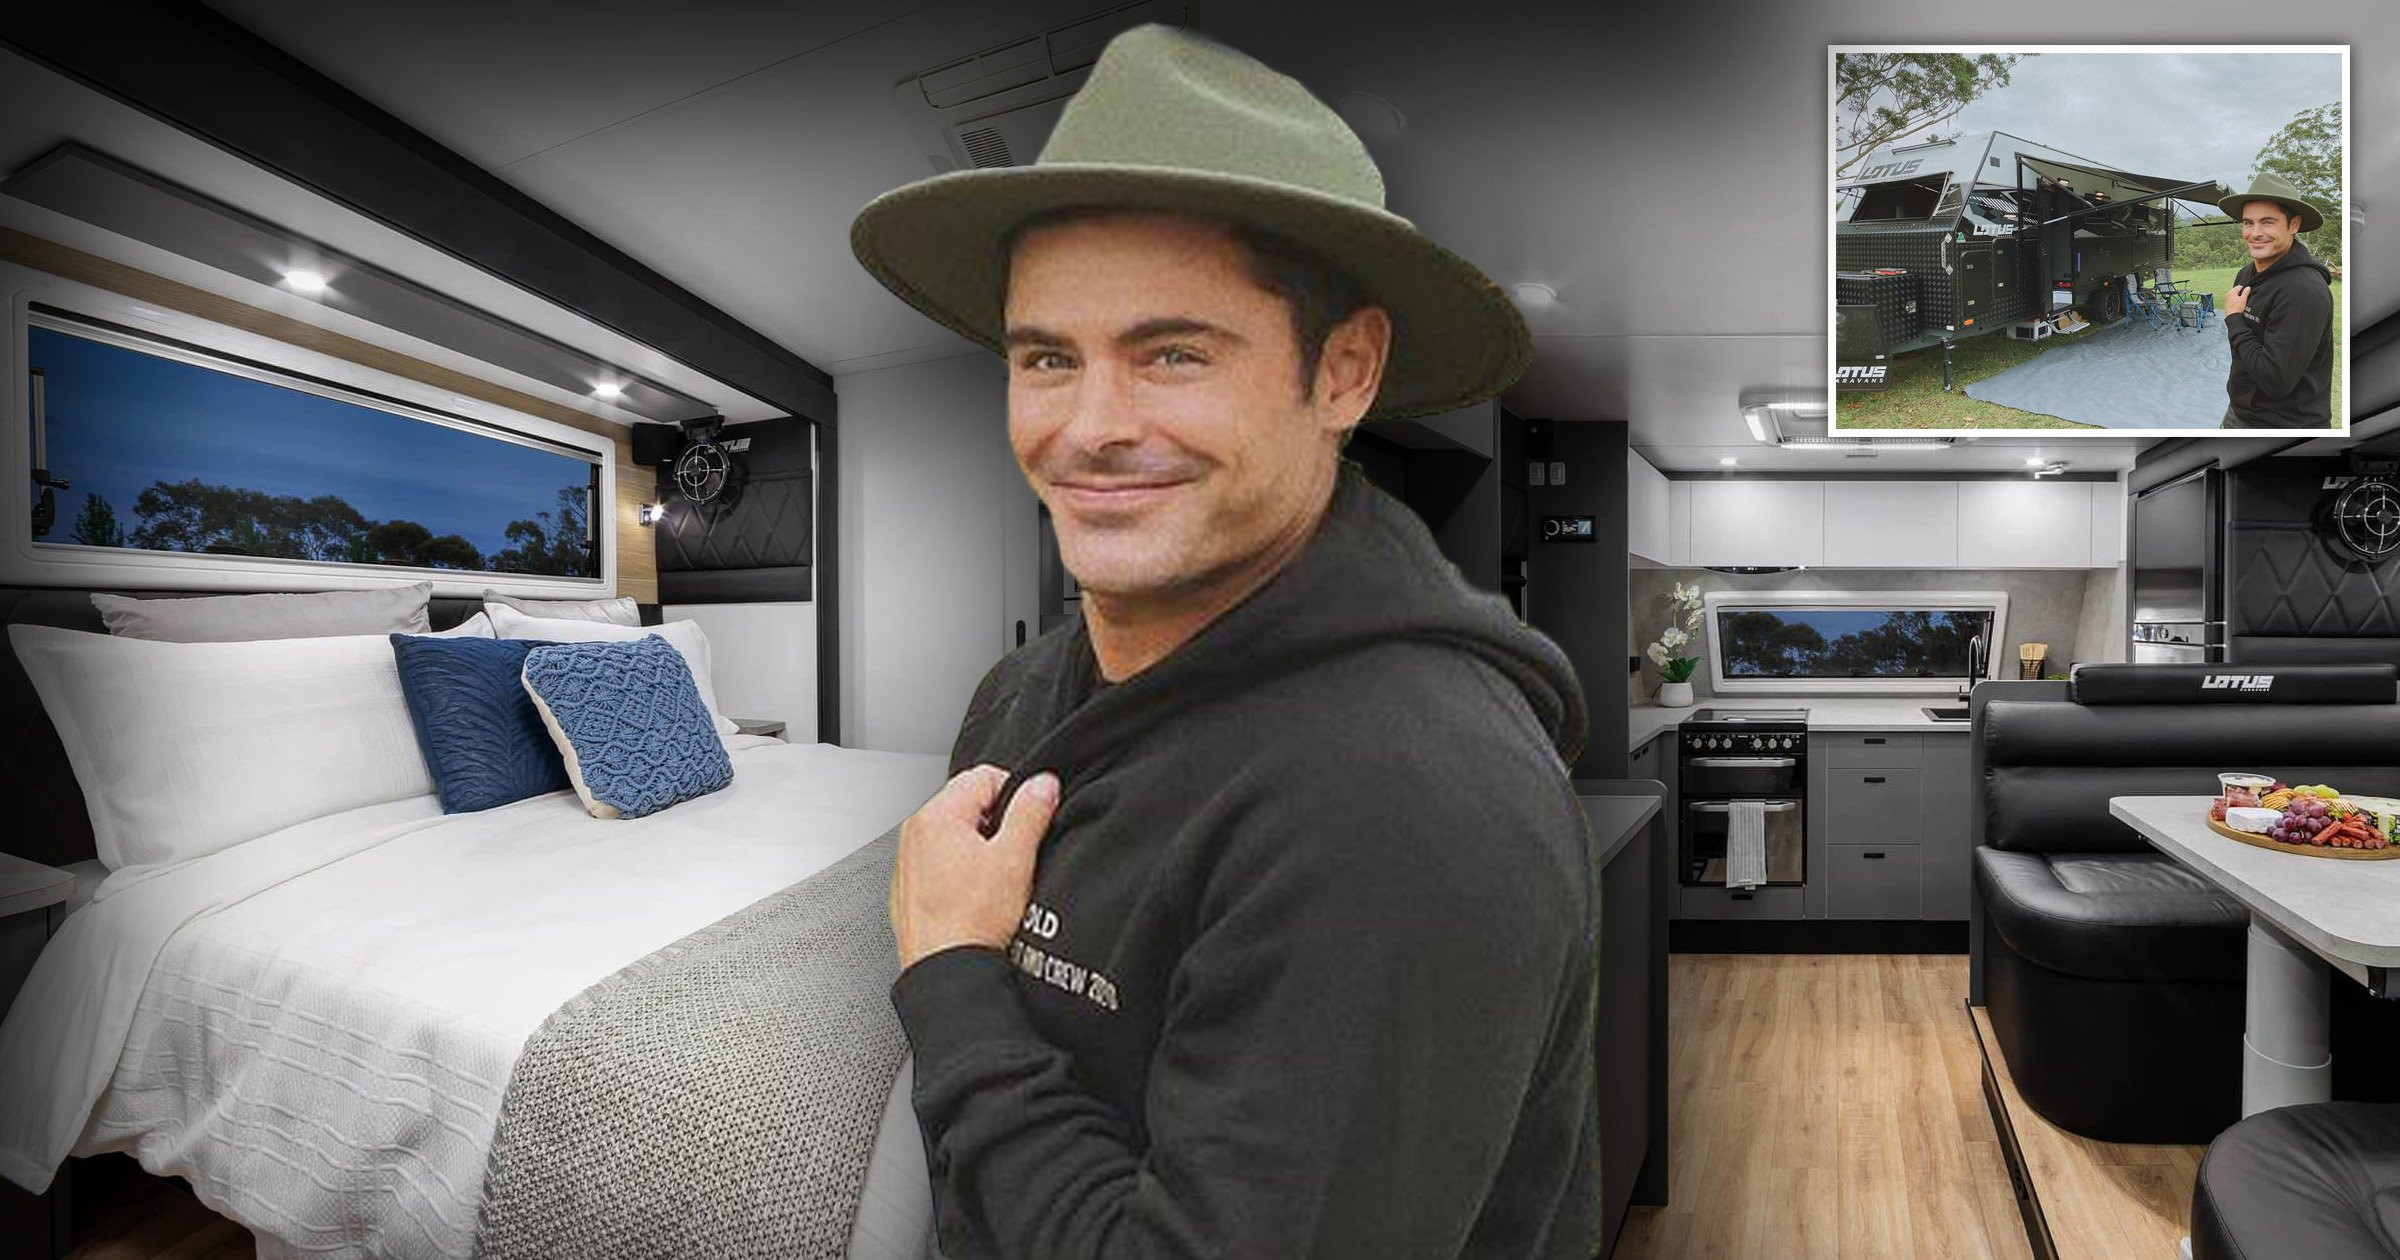 Inside Zac Efron’s epic $140,000 caravan on set of new movie Gold in Australia’s outback: ‘Home sweet home’